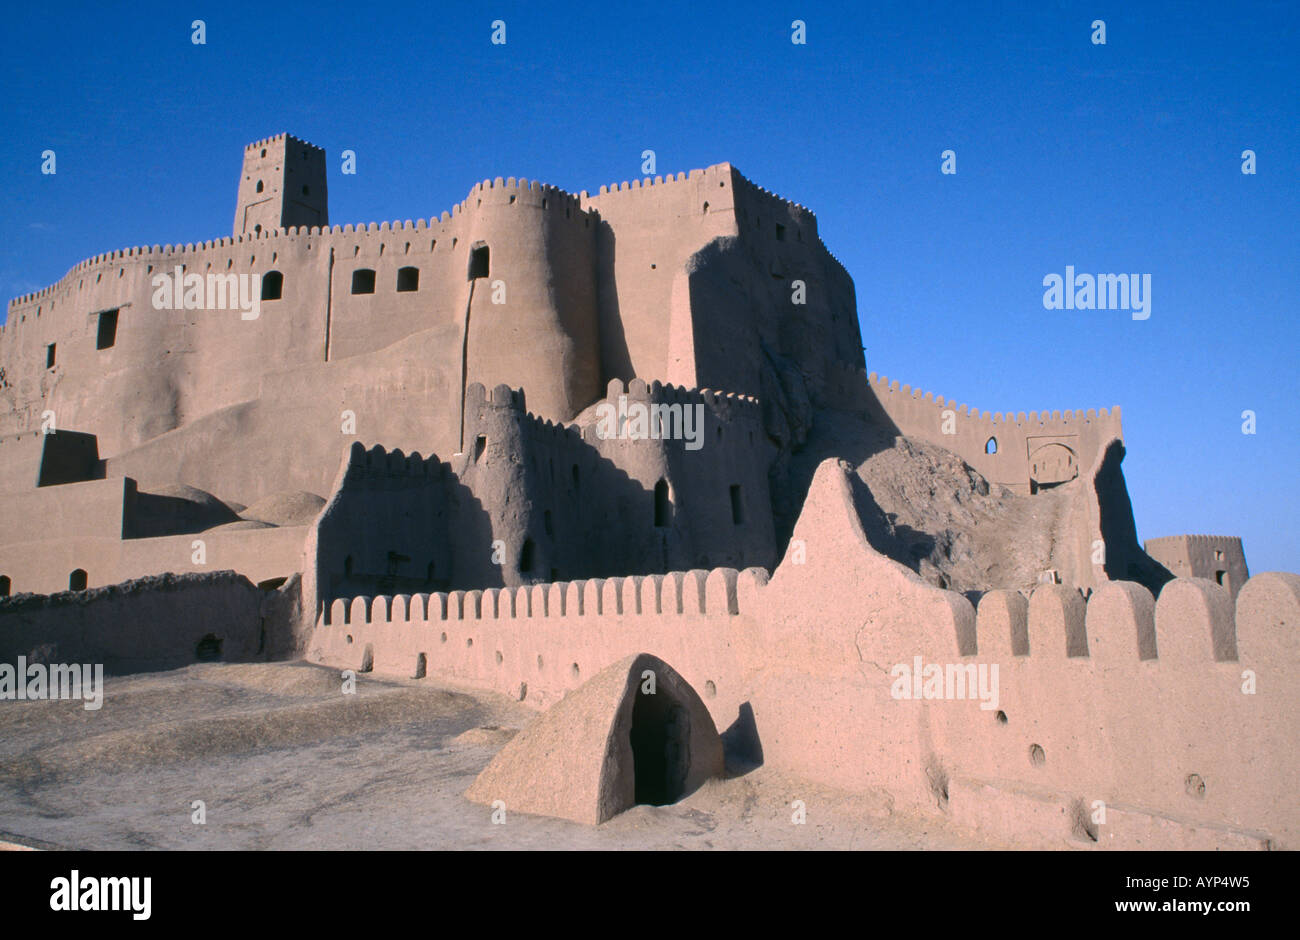 IRAN Central Asia Middle East Kerman Province Bam Arg e Bam Citadel castle fort before 2003 earthquake destroyed mud brick town Stock Photo